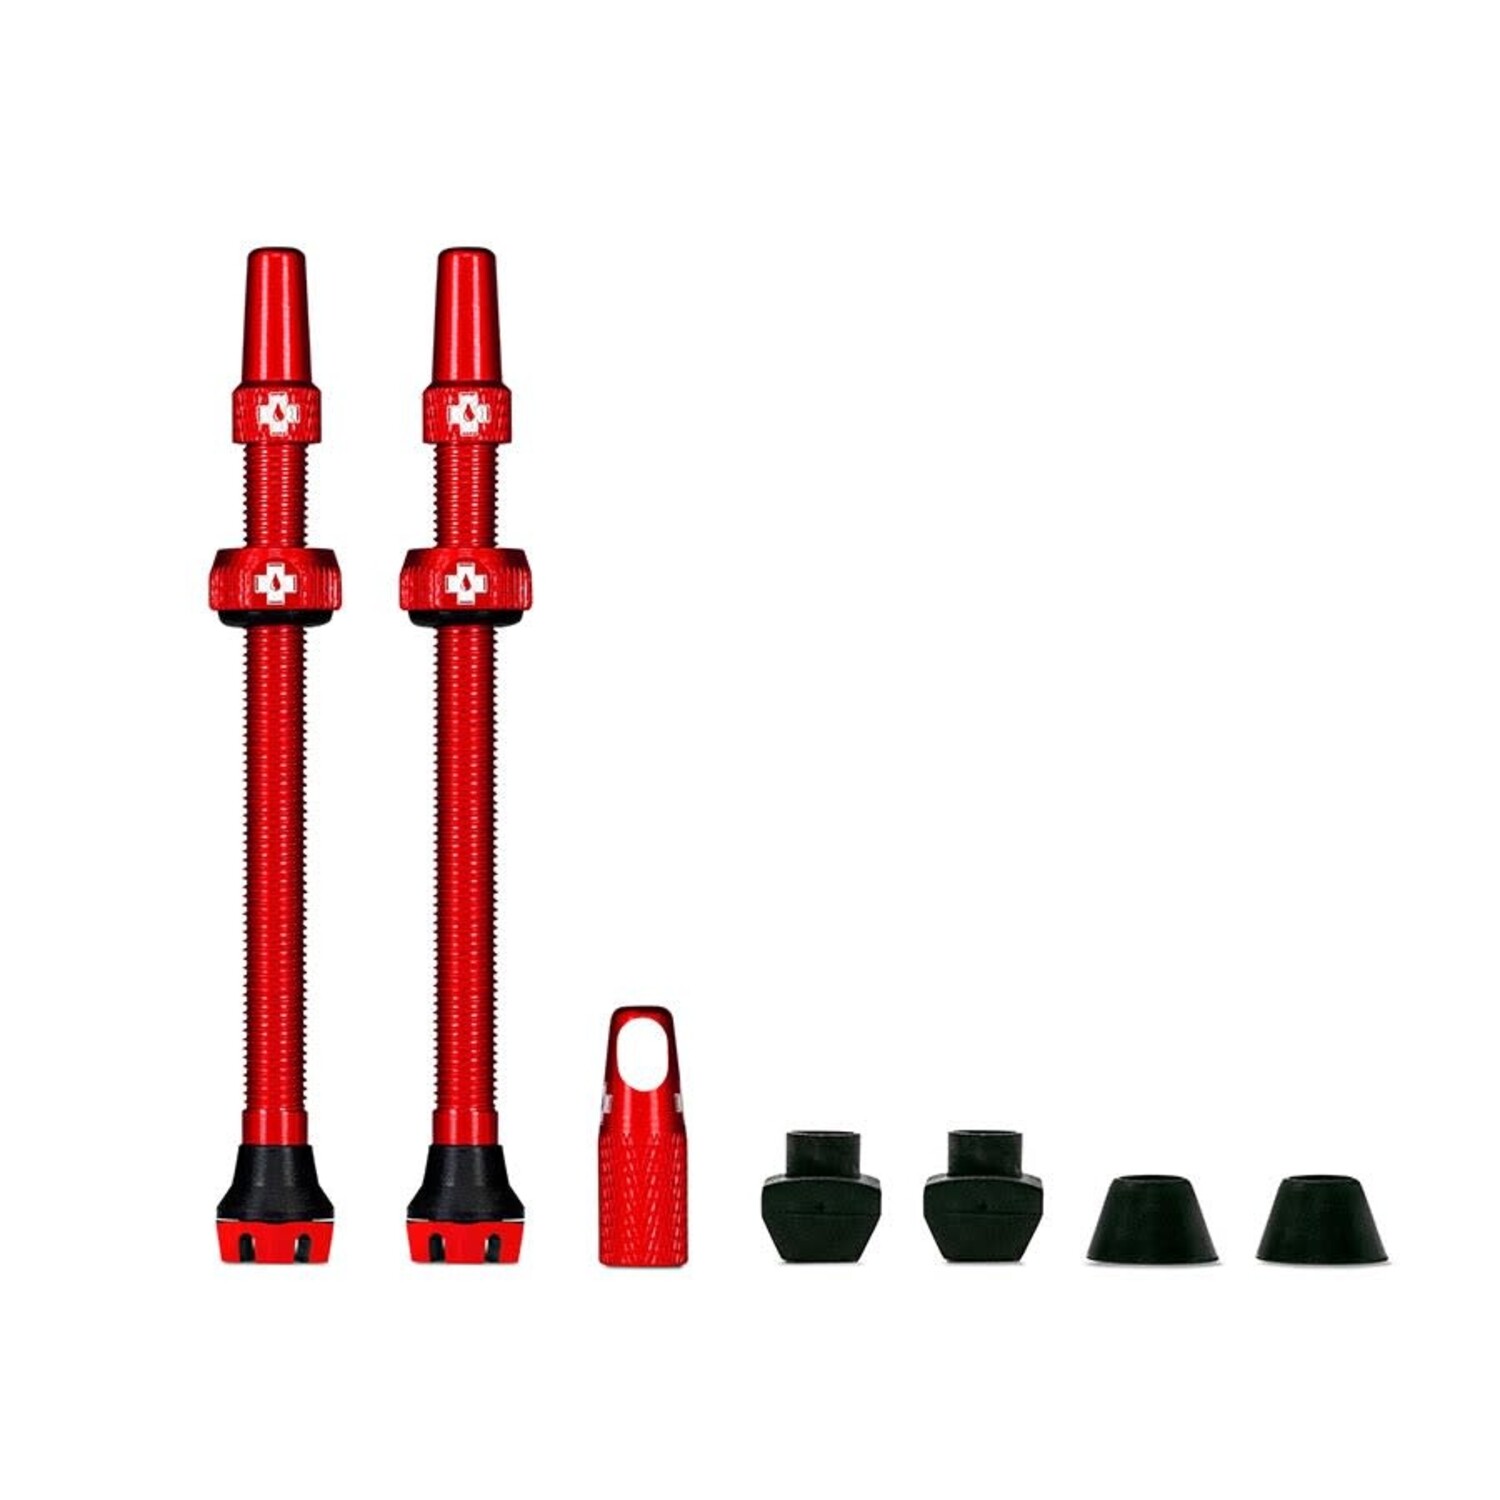 Muc-Off, V2, Tubeless Valve, Presta, 80mm, Red, Pair - Dream Cyclery